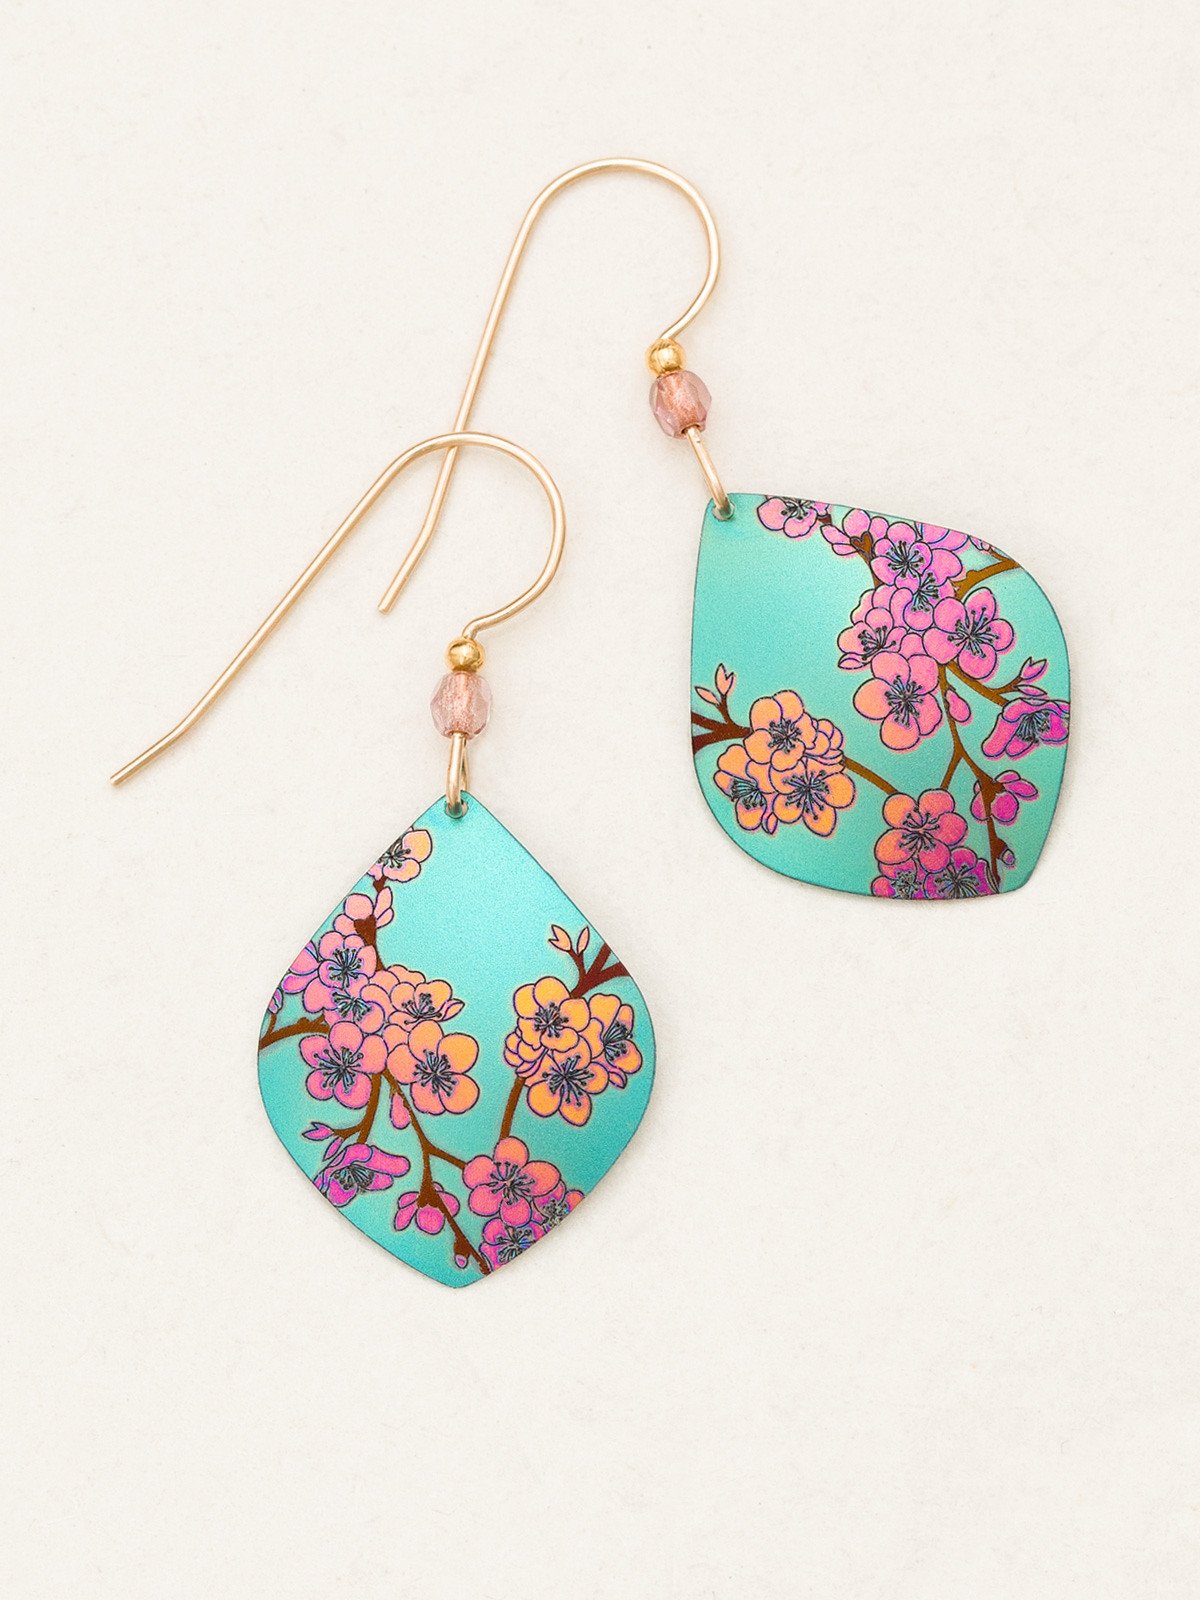 teal cherry blossom earrings by jewelry designer Holly Yashi